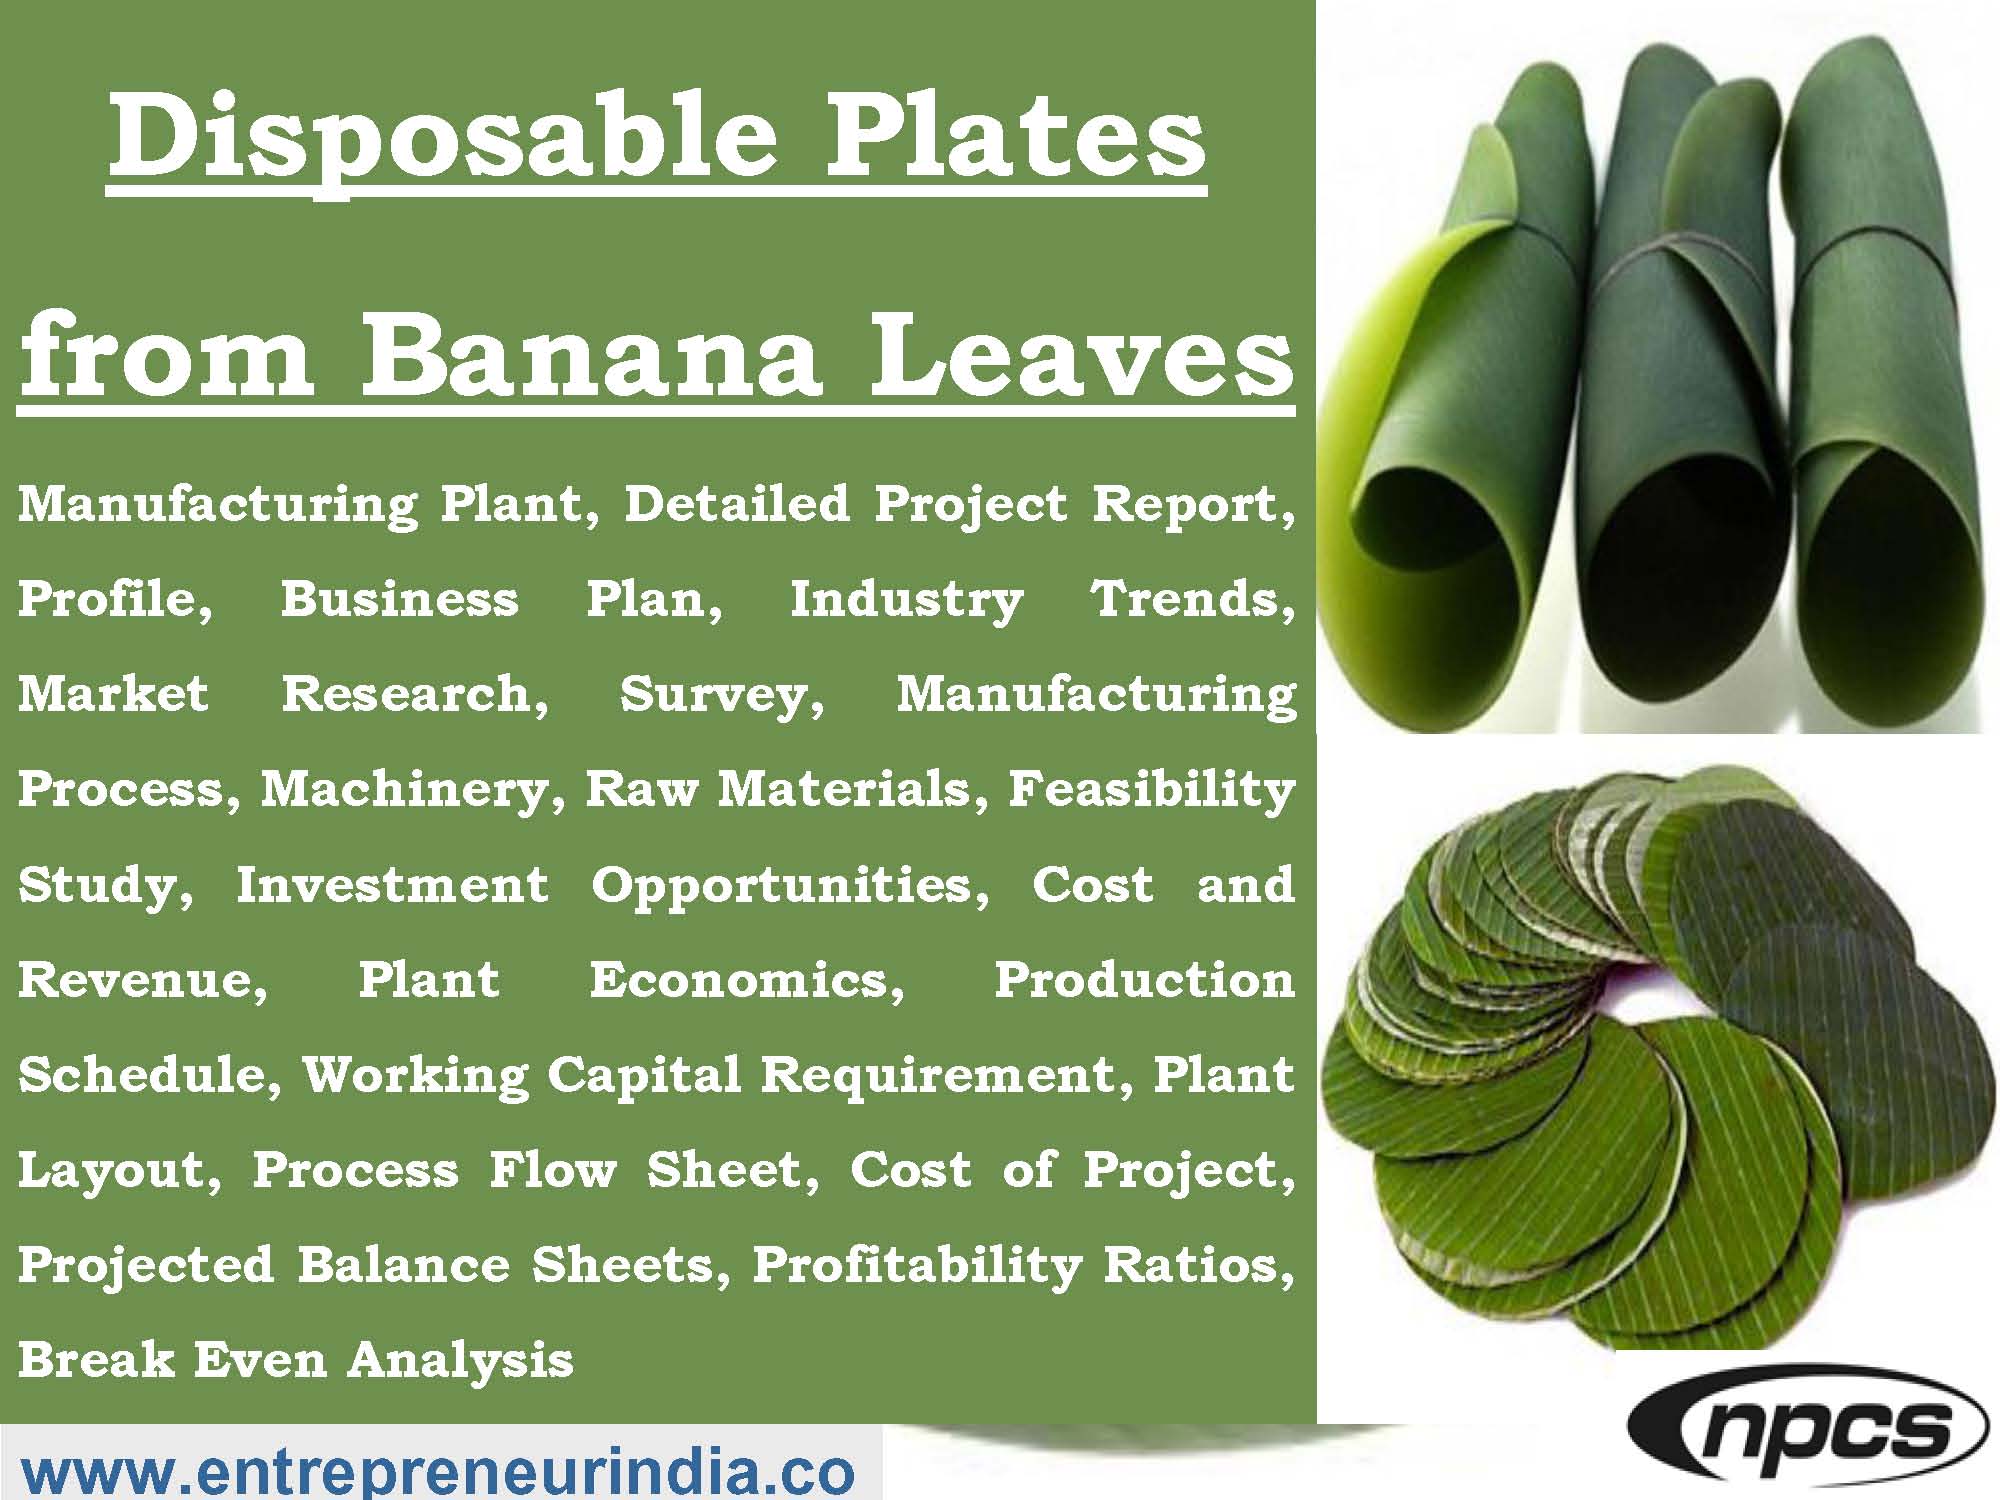 Disposable Plates from Banana Leaves